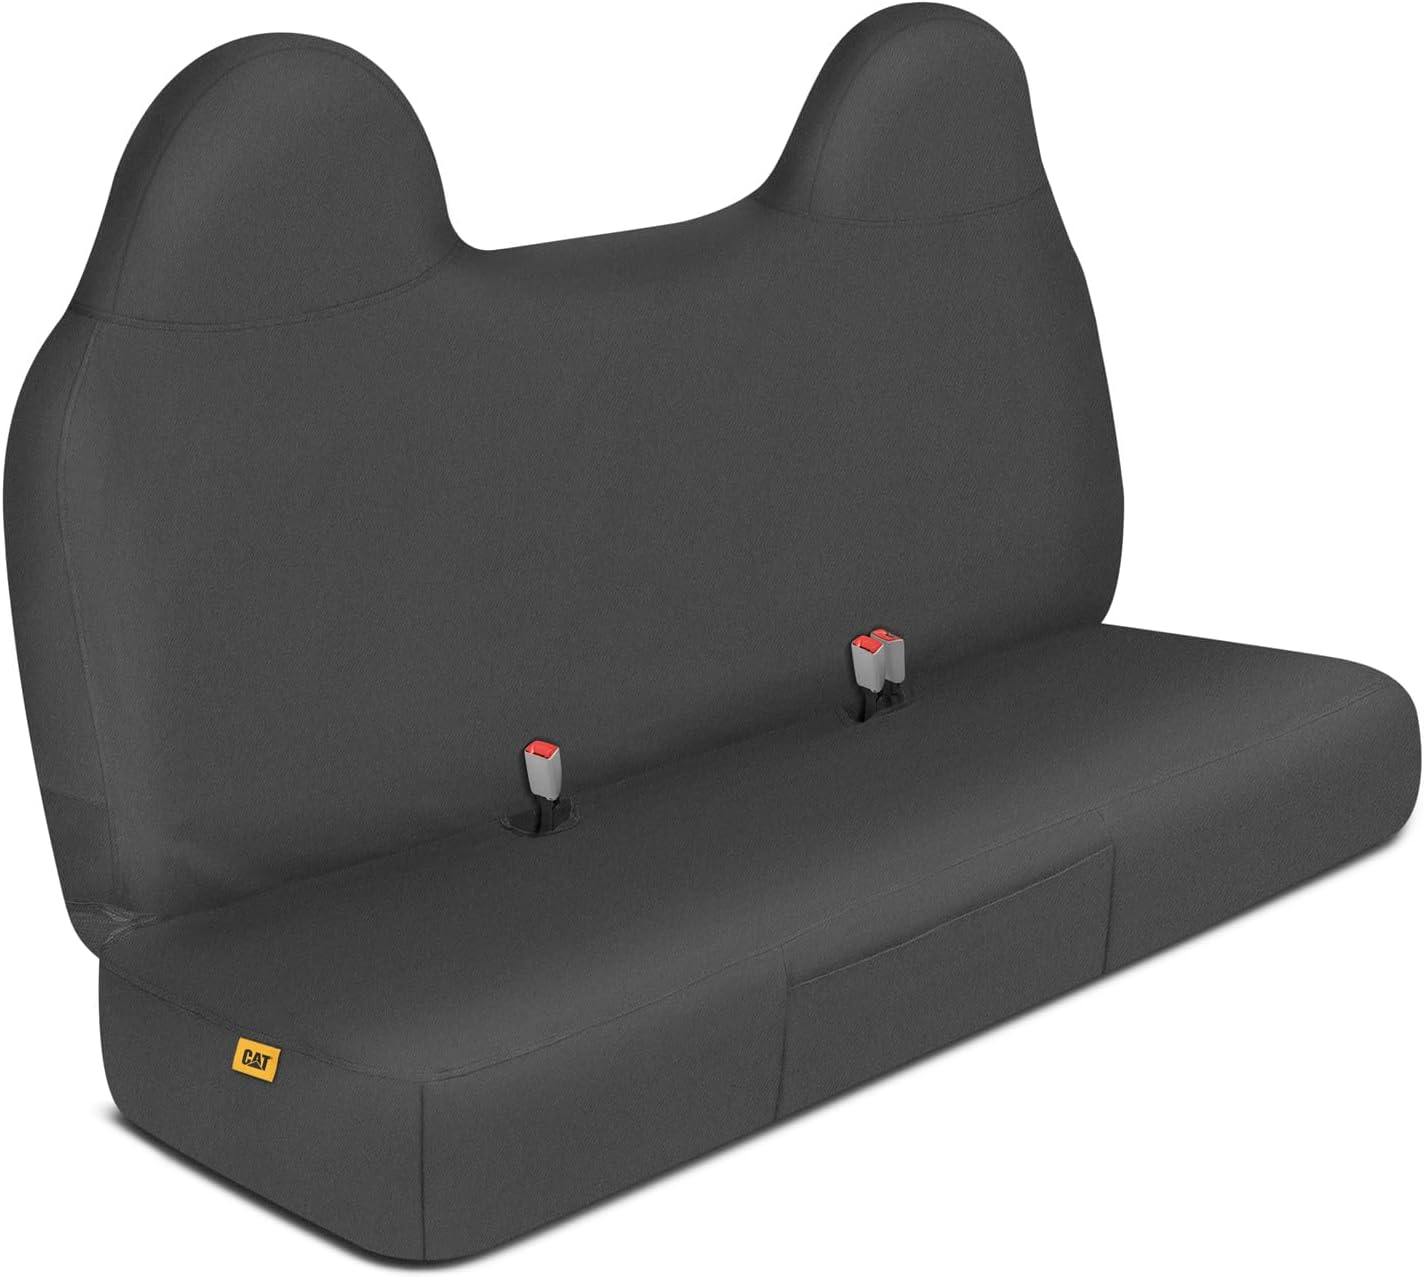 Caterpillar Custom Fit Front Bench Seat Cover with Utility Pockets for Ford F250 \/ F350 \/ F450 \/ F550 (1999-2007) - Durable Black Oxford Super Duty Interior Truck Seat Cover